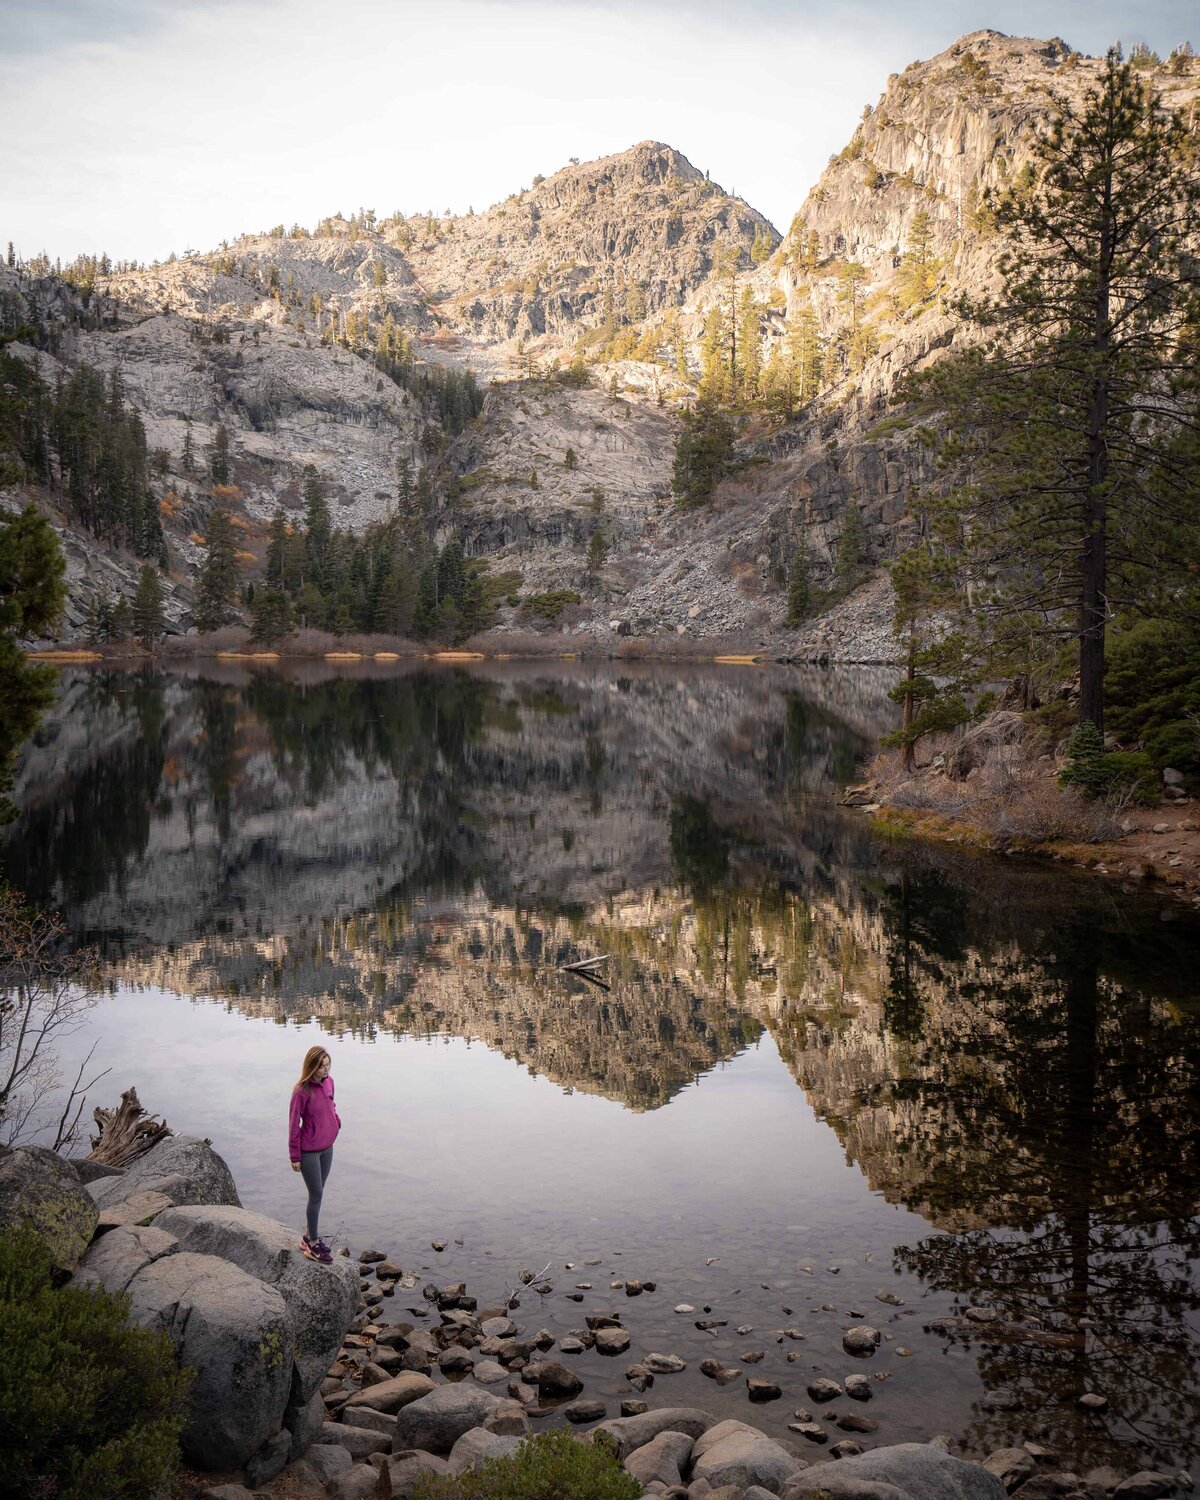 Woman in pink coat standing on rock next to Lake Tahoe with mountains in the background